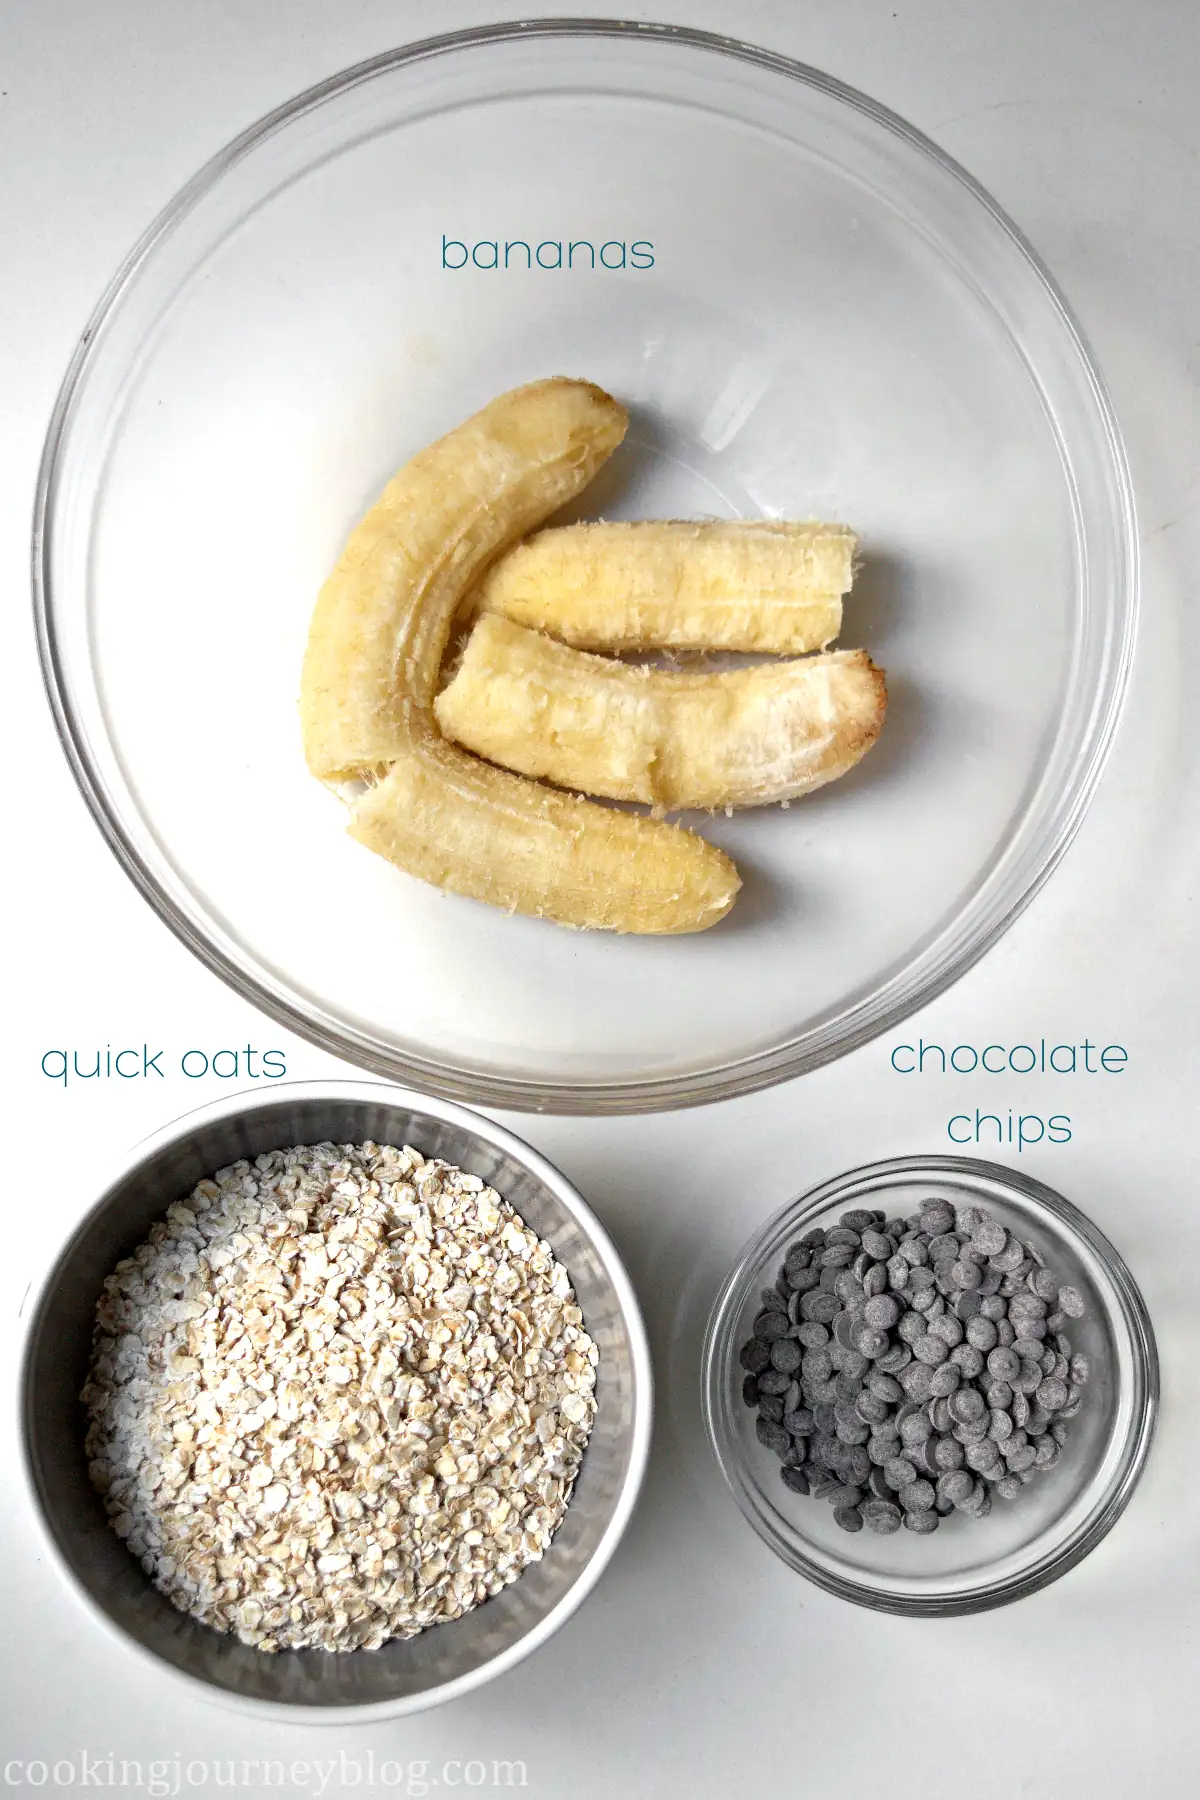 3 Ingredients for Oatmeal banana cookies: ripe bananas, quick oats and chocolate chips